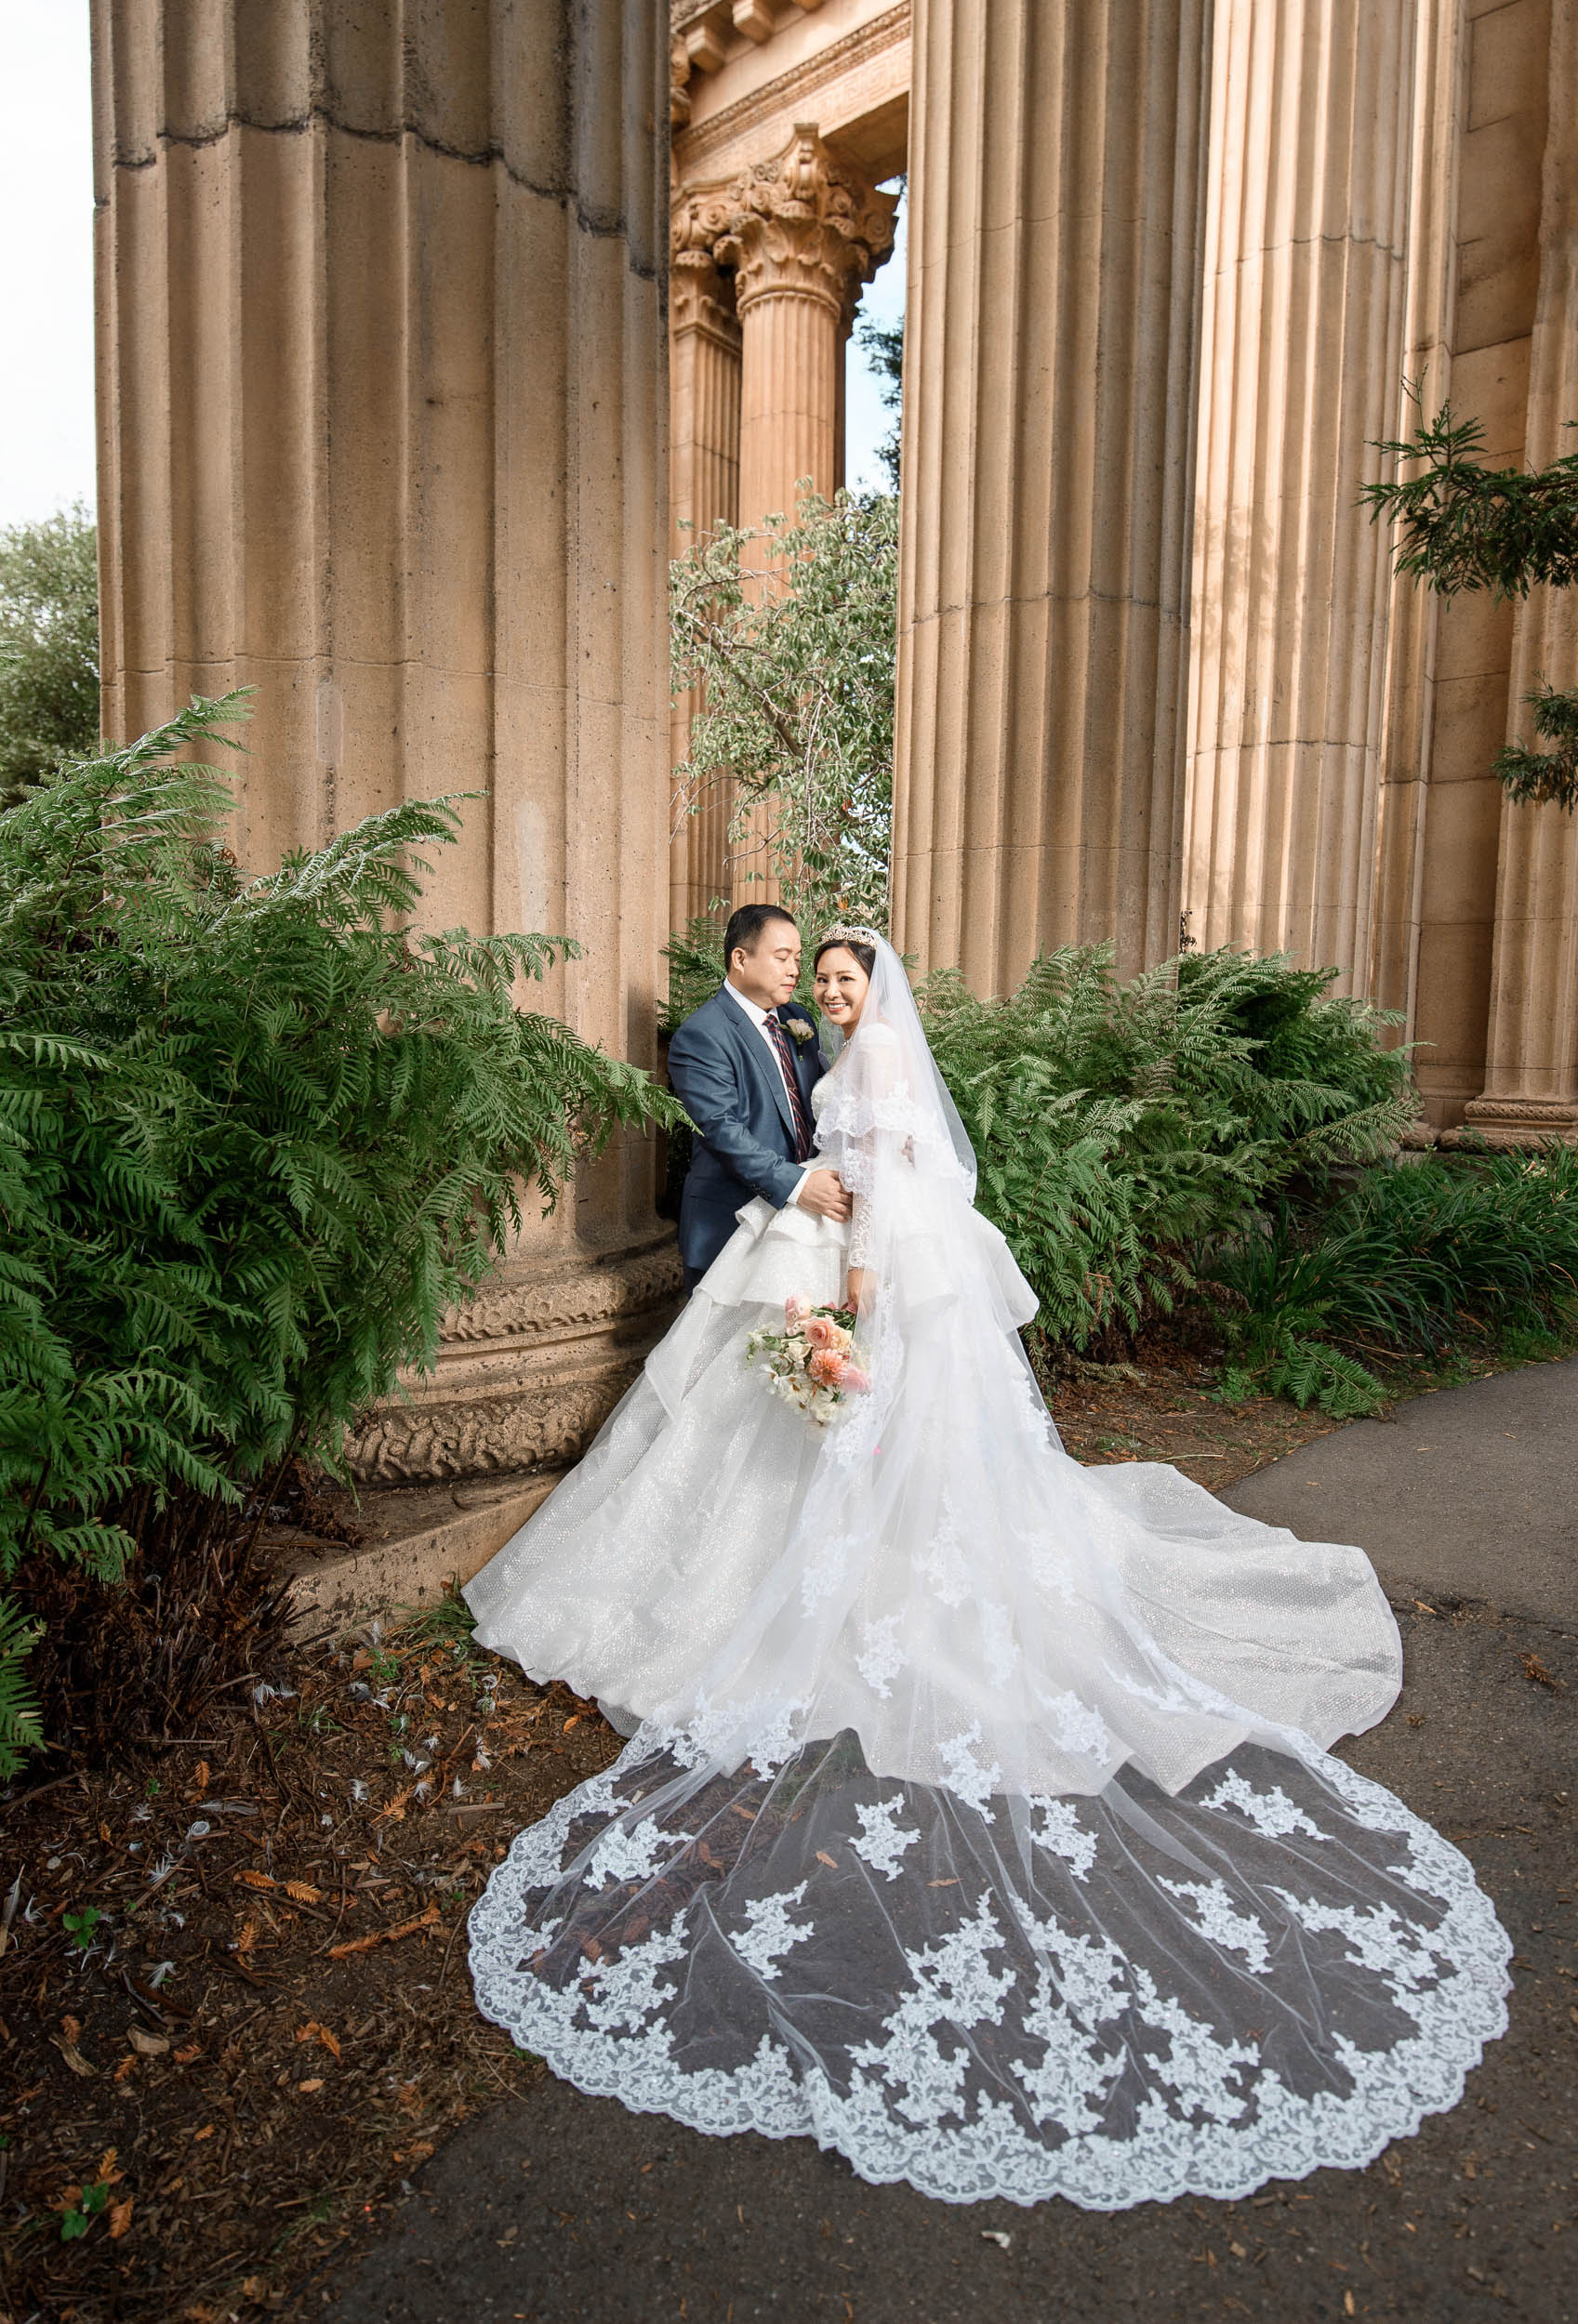 A bride and groom pose in front of pillars at the palace of fine arts.